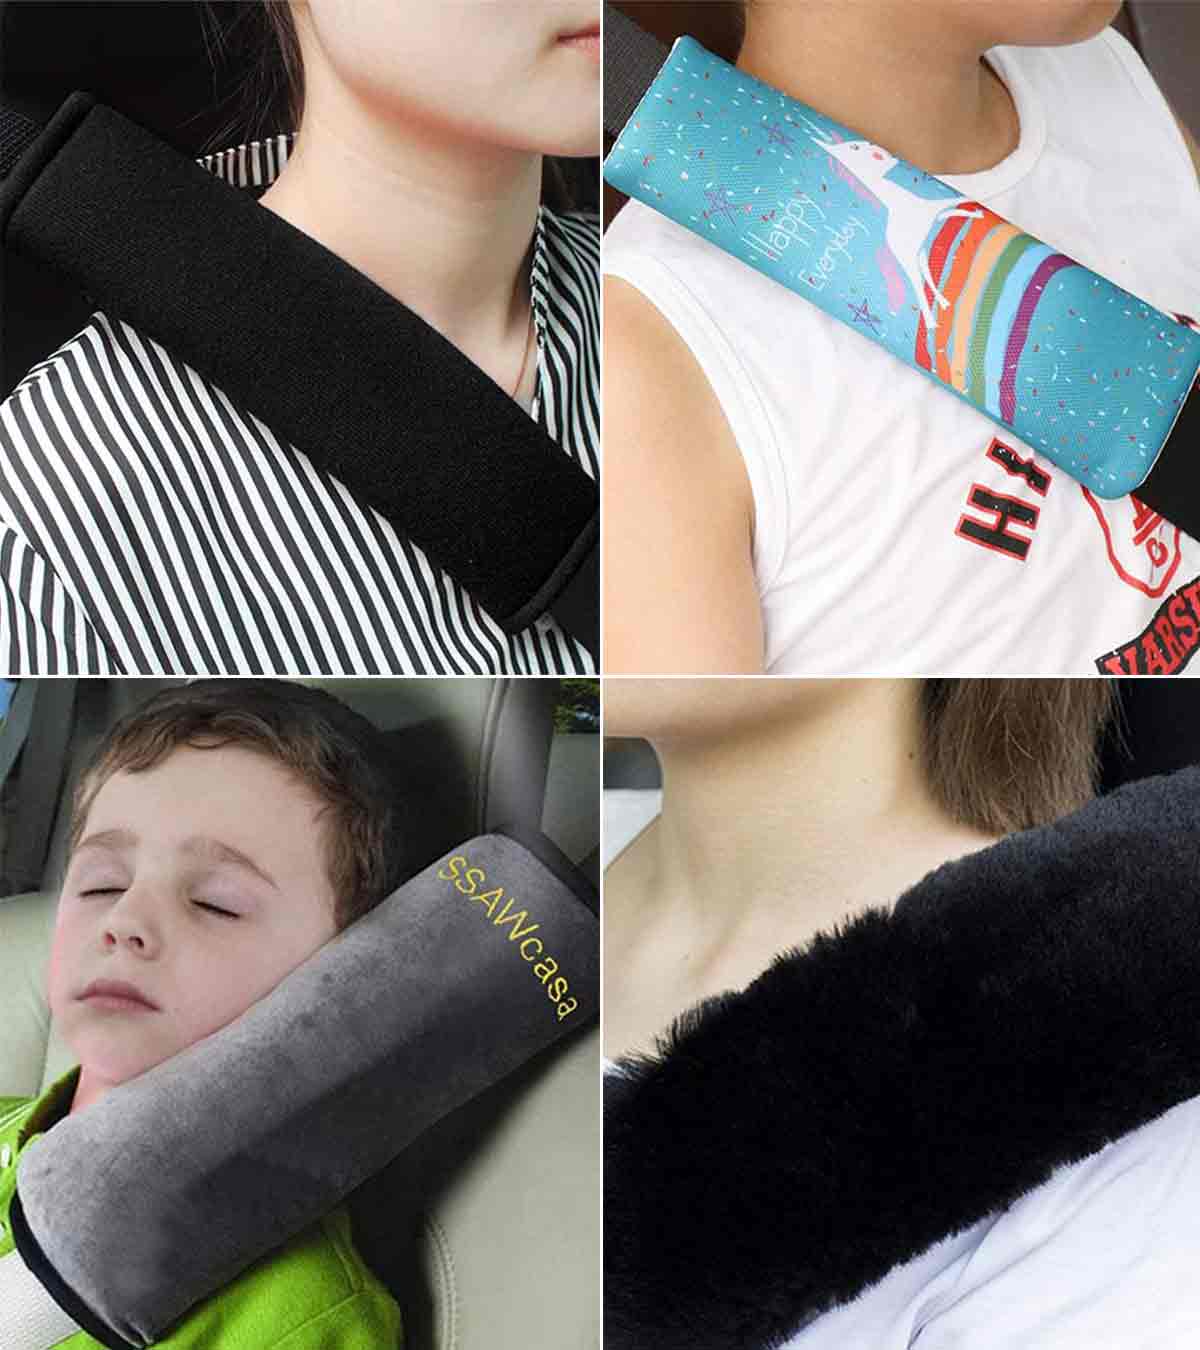 Seatbelt Pillow for Kids, for car booster seat, travel infant and toddler car  seat head and neck shoulder support protection belt cushion, adult  children's seat belt cushion 